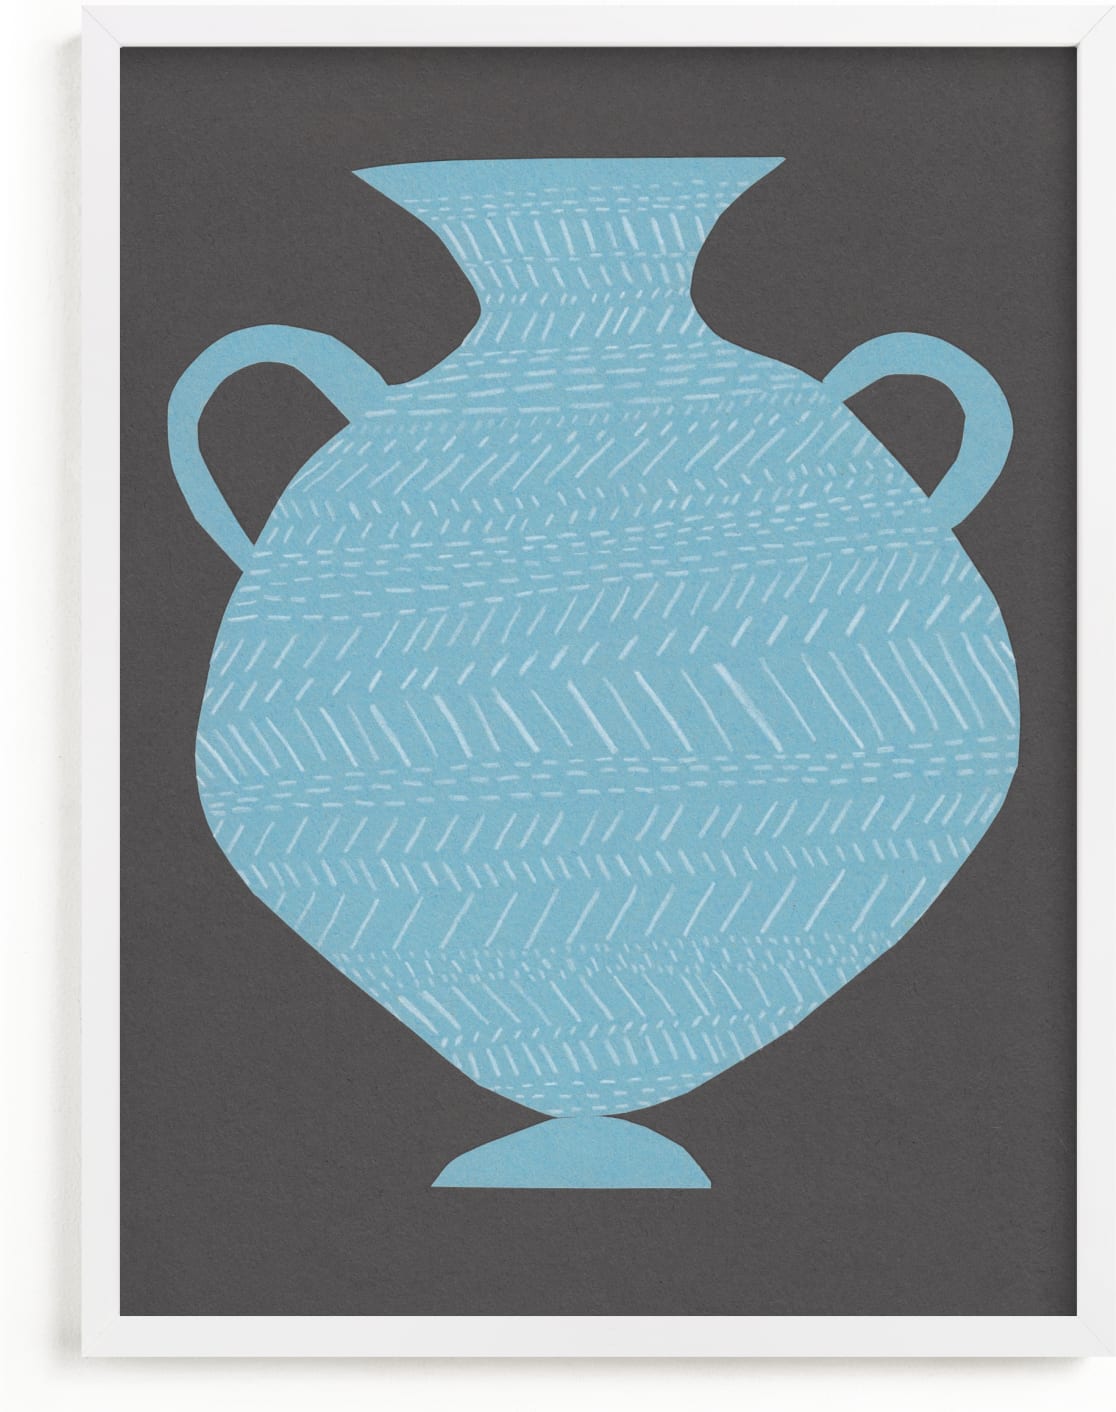 This is a blue, grey, black art by Elliot Stokes called Amphora (blue).